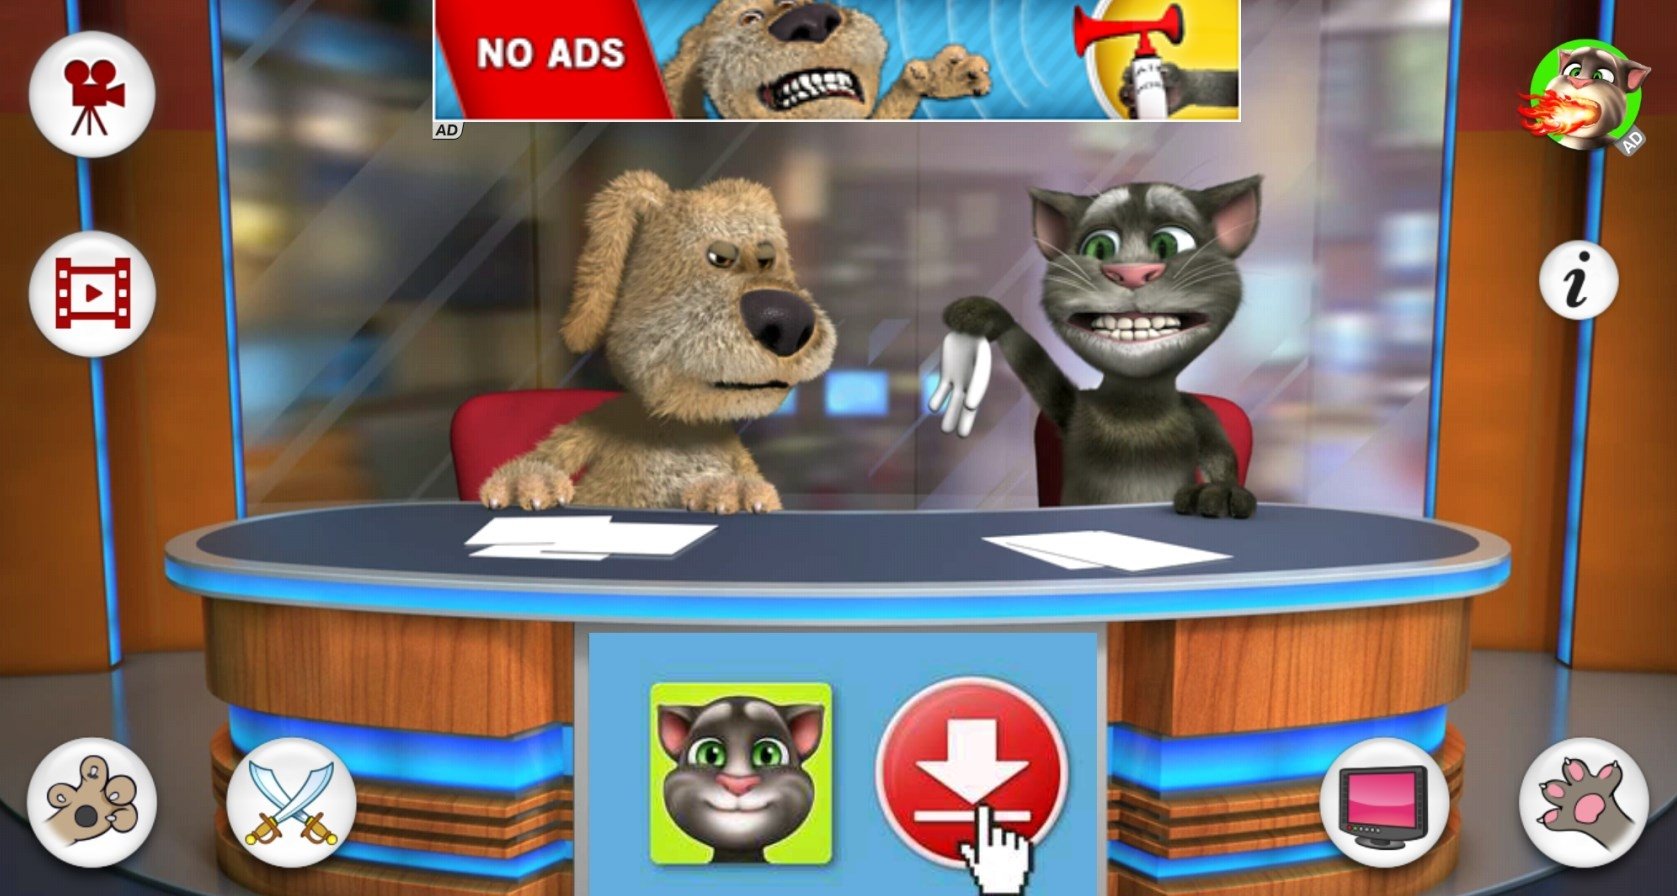 Talking tom and ben scratch